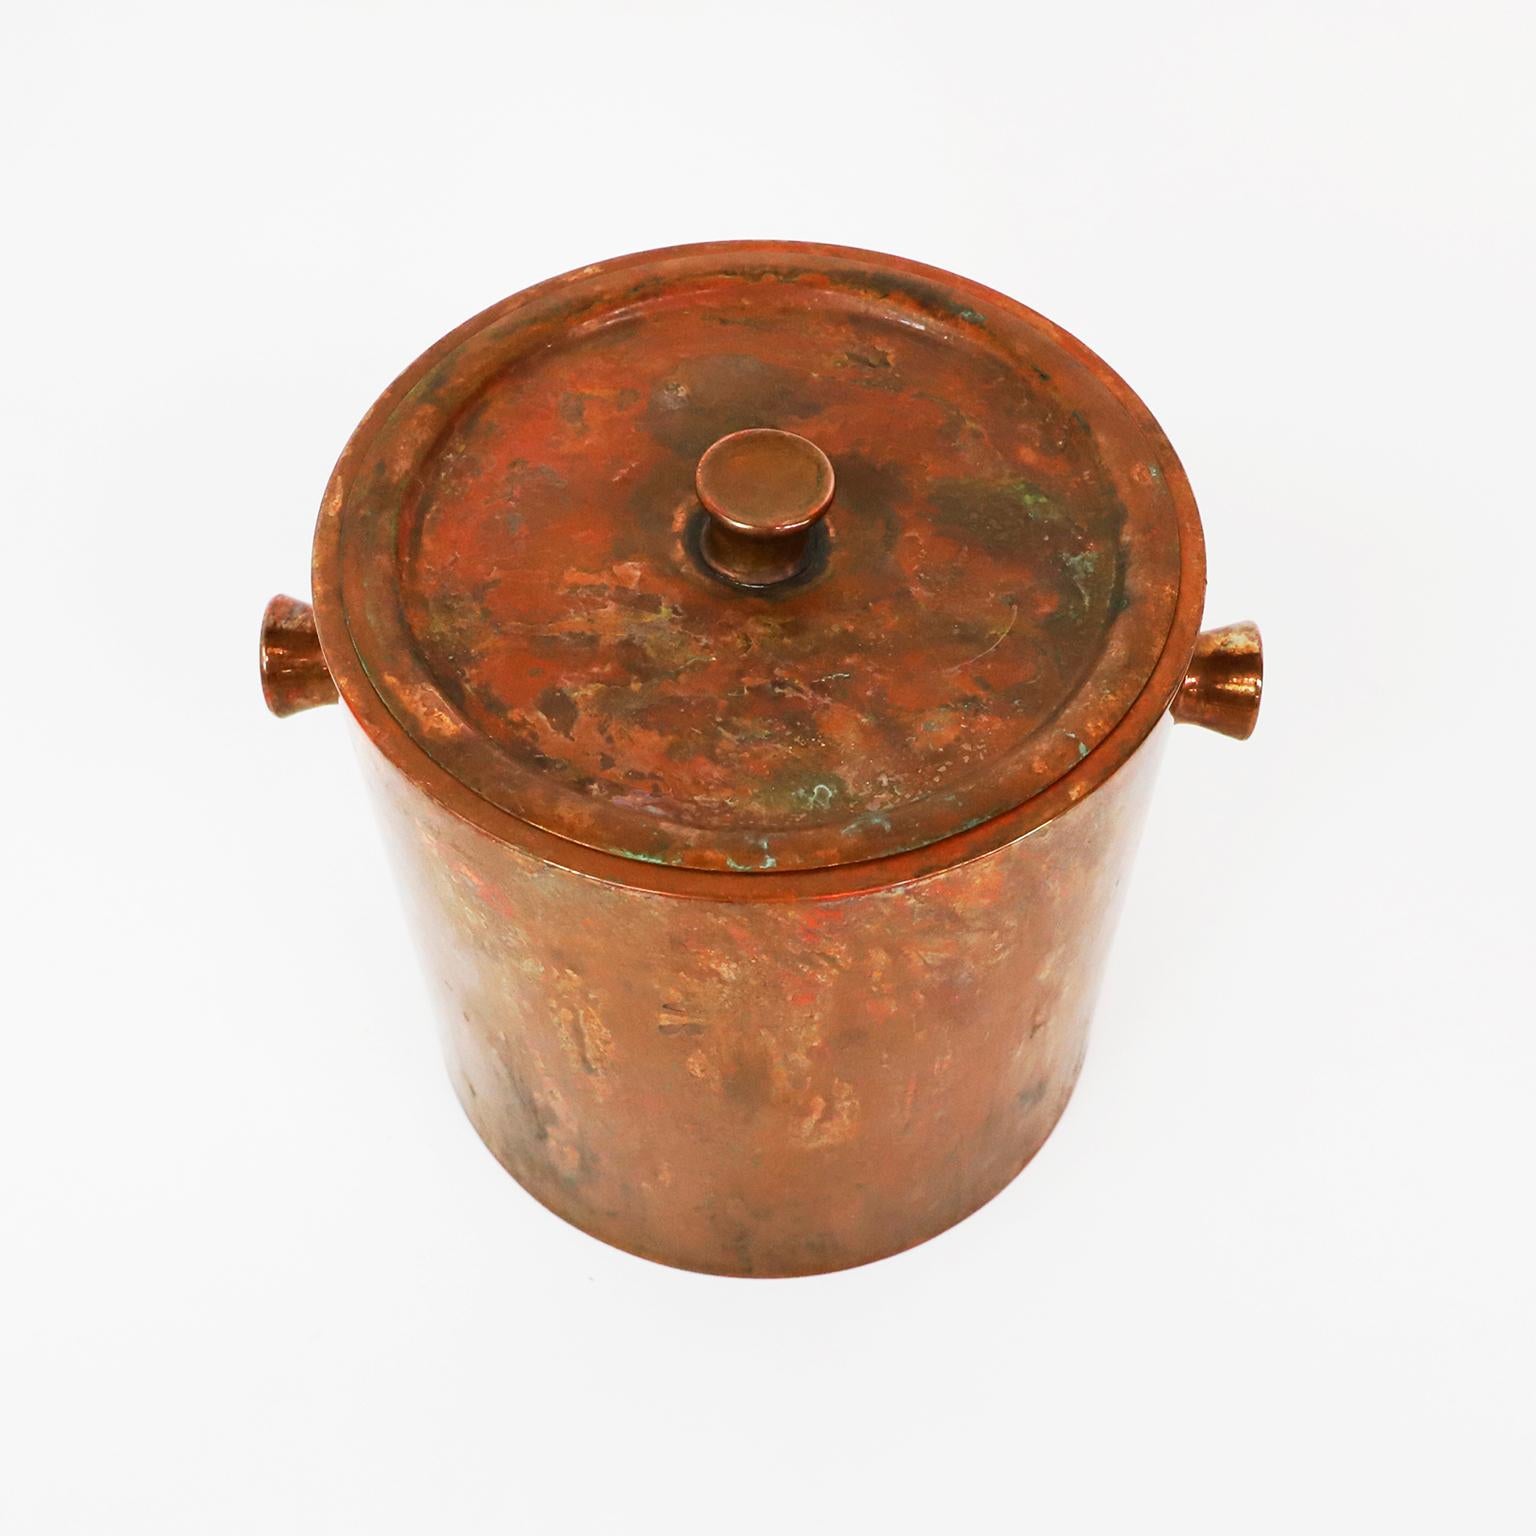 Circa 1960, We offer this Mexican copper wine cooler/ice bucket, fantastic patina and very heavy and strong piece.